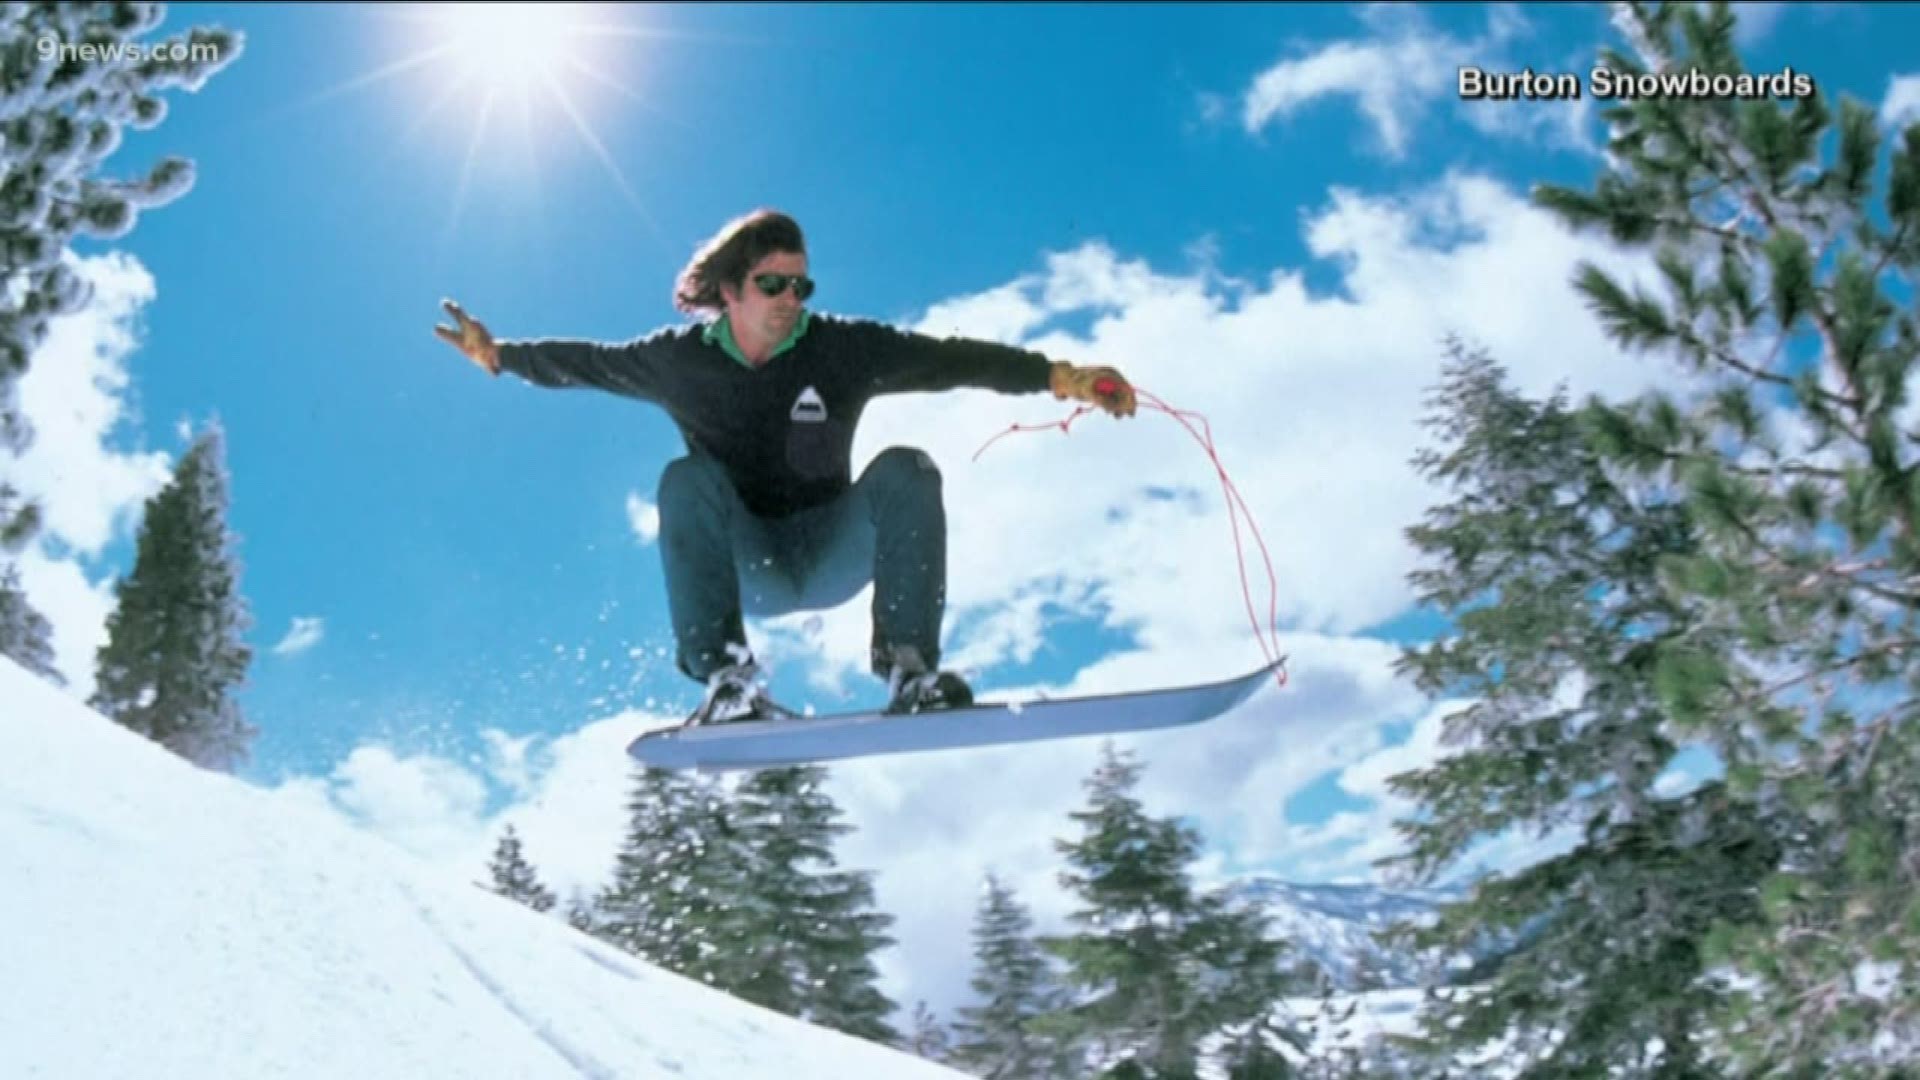 The pioneer who brought snowboarding to the masses has died at 65.